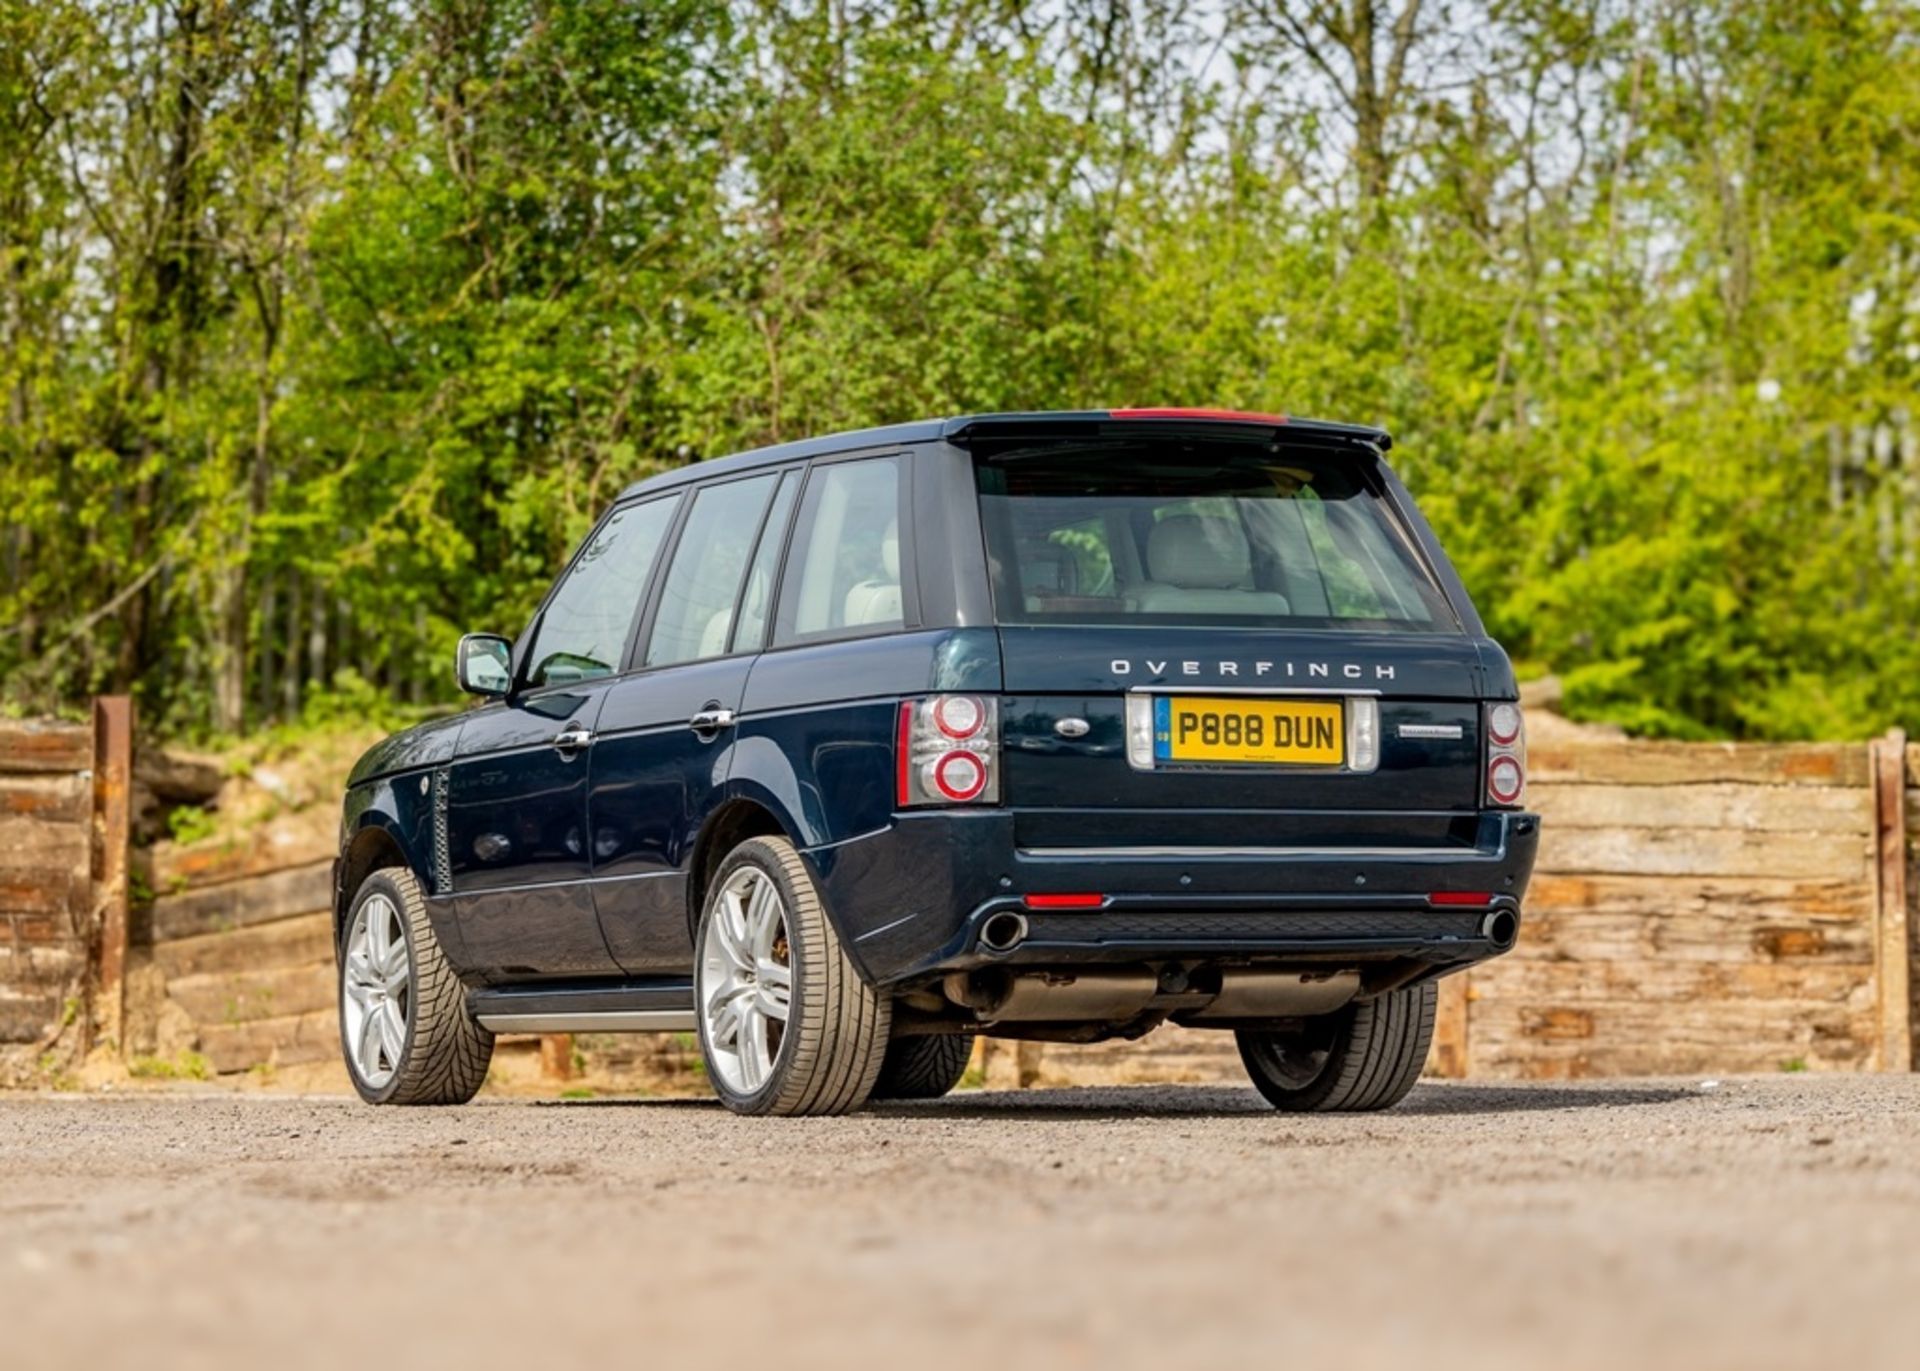 2009 Range Rover L322 Holland & Holland 5.0 Supercharged - Image 3 of 40